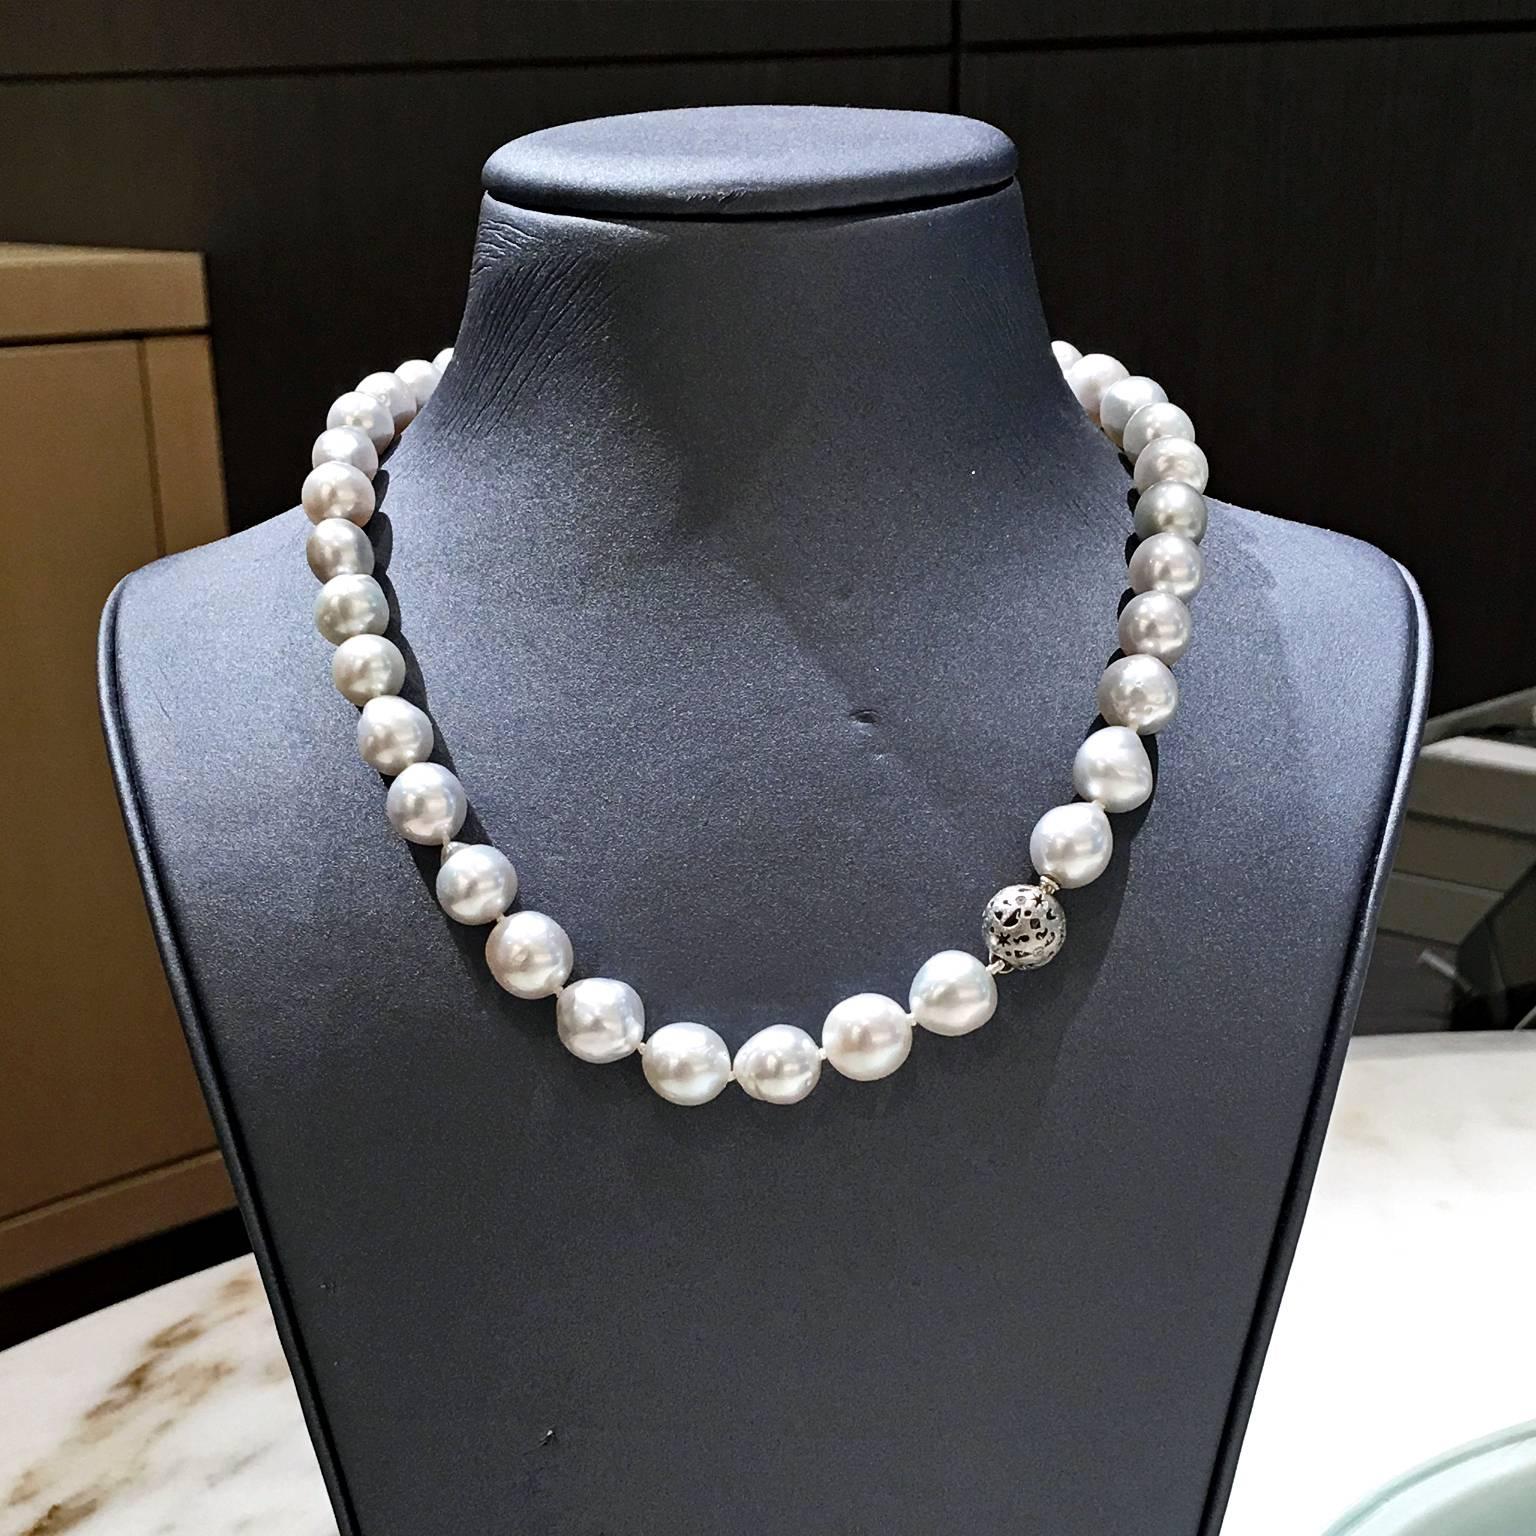 One-of-a-Kind Milkyway Ball Necklace made in 2016 by renowned jewelry artist Barbara Heinrich with a handmade platinum milkyway ball clasp with 0.10 total carats of bezel-set round brilliant-cut white diamonds strung on a strand of stunning silver